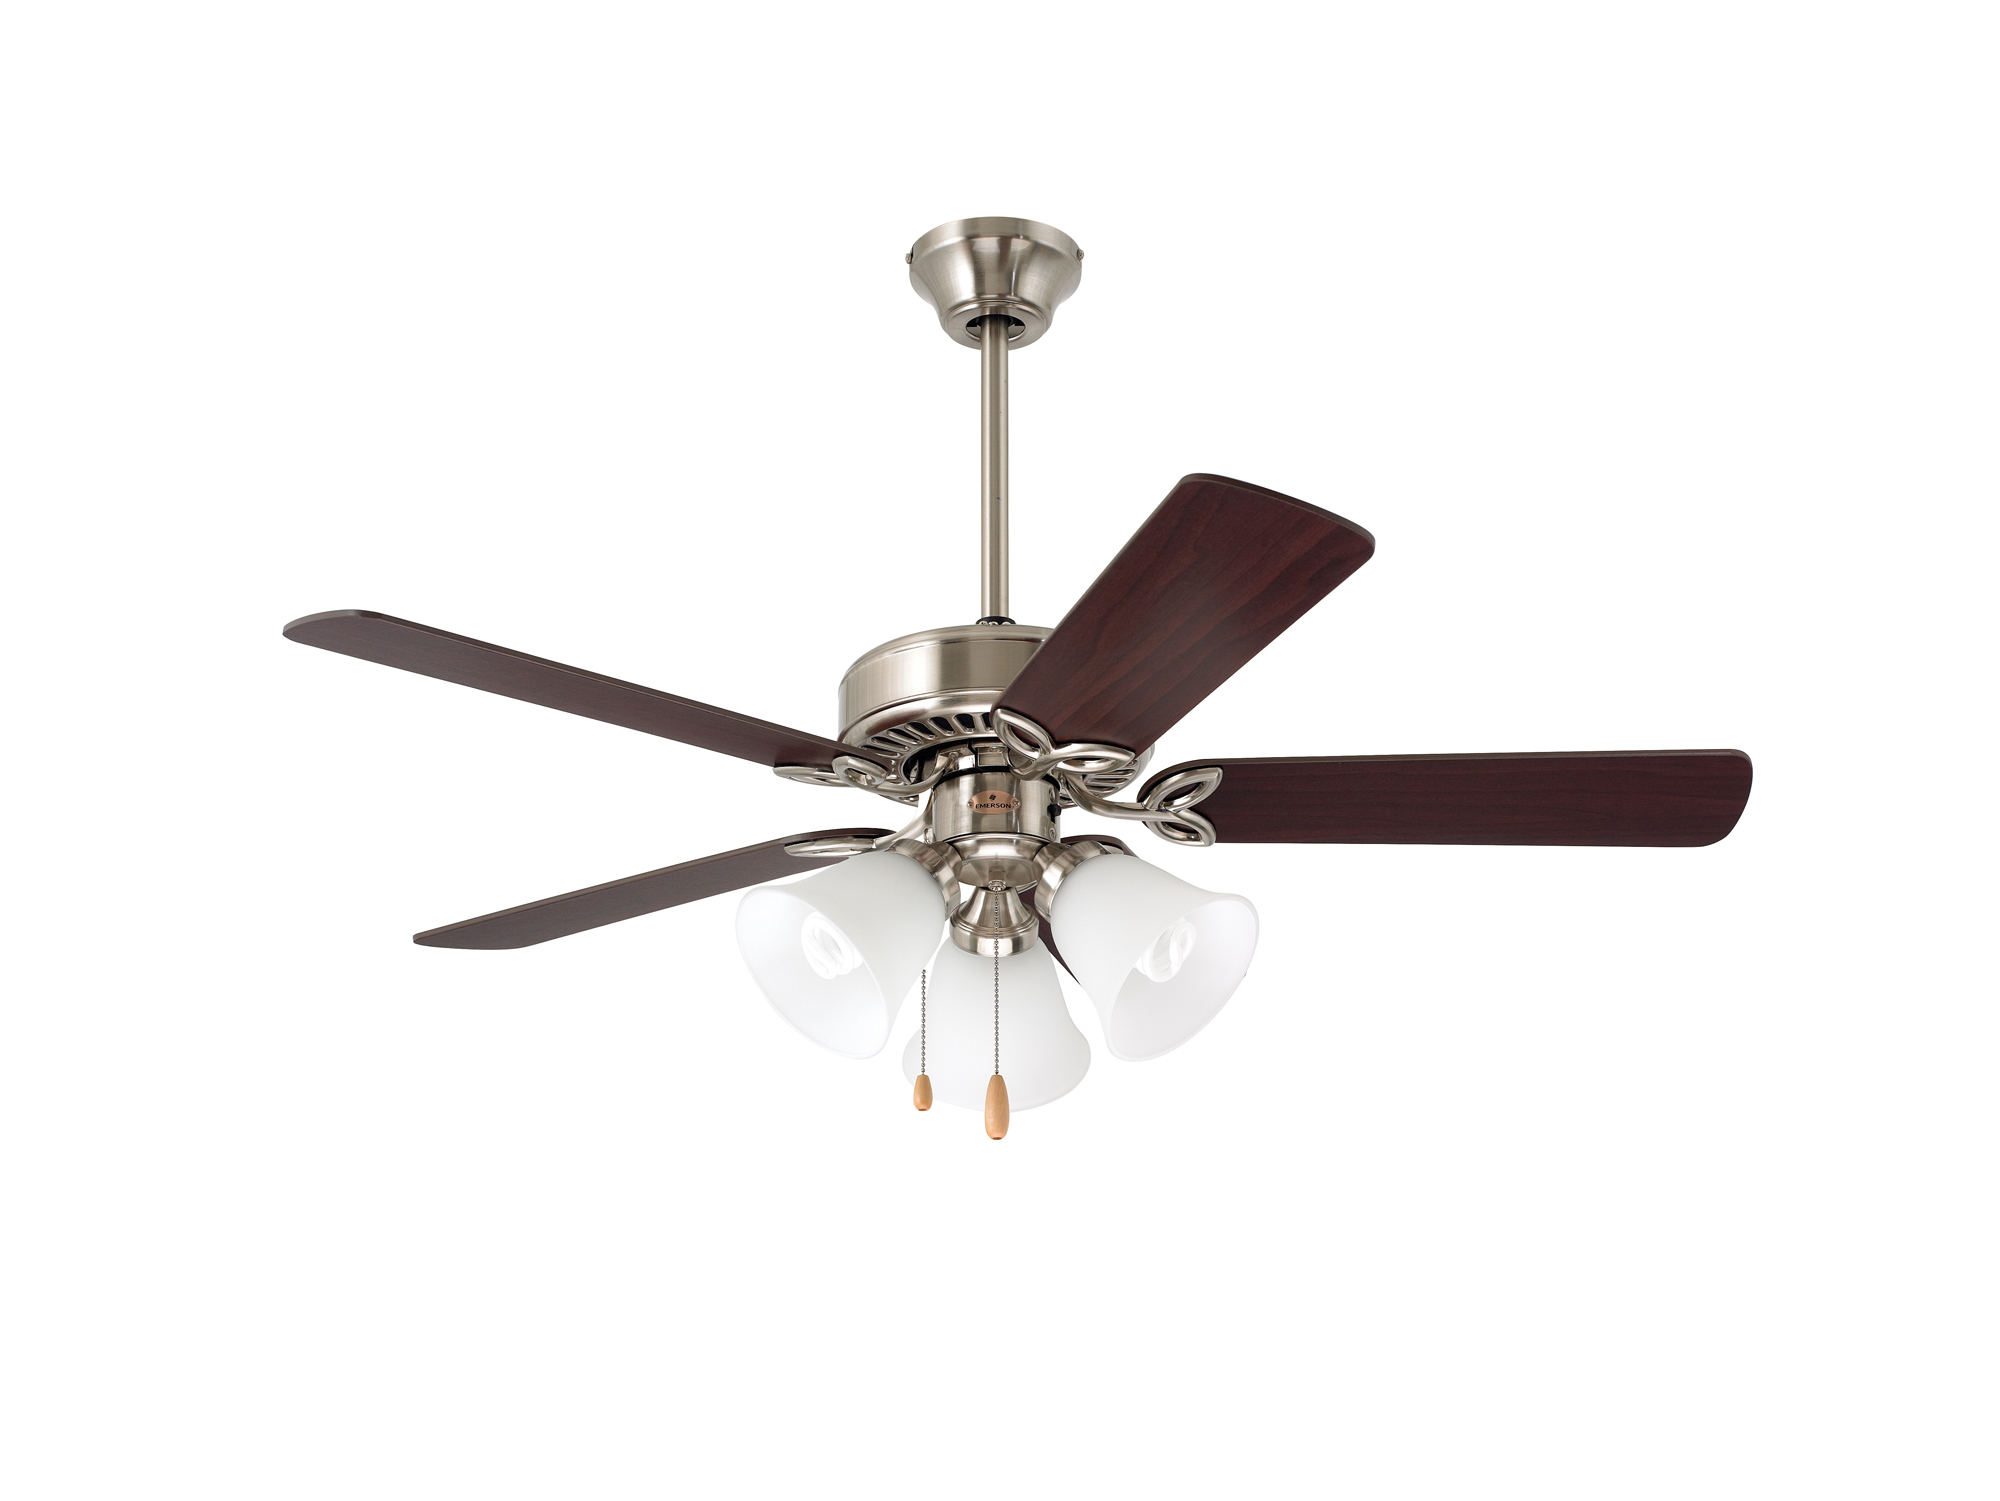 Pro Series 710 Ceiling Fan With Light By Emerson Ceiling Fans